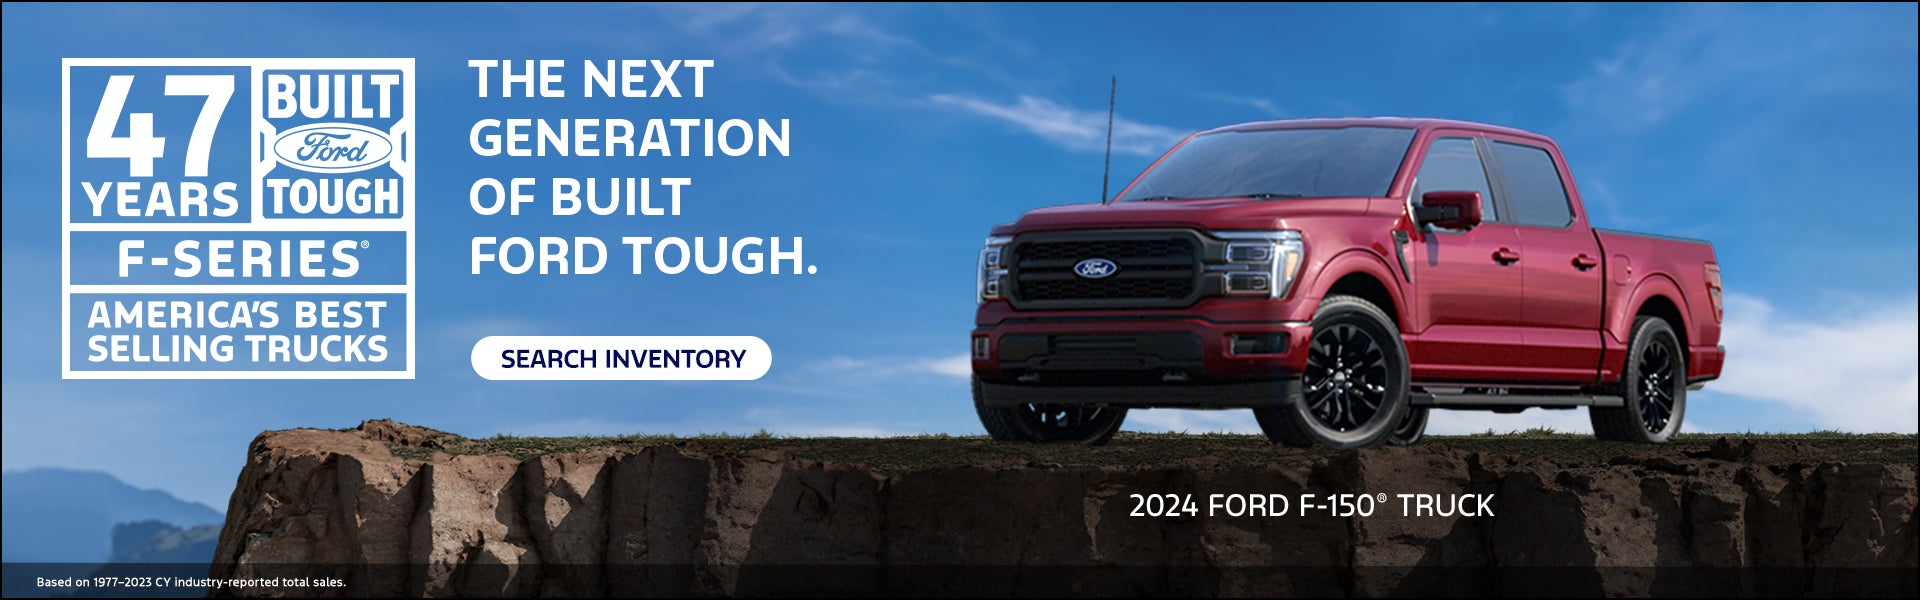 47 years f-series best selling banner f-150